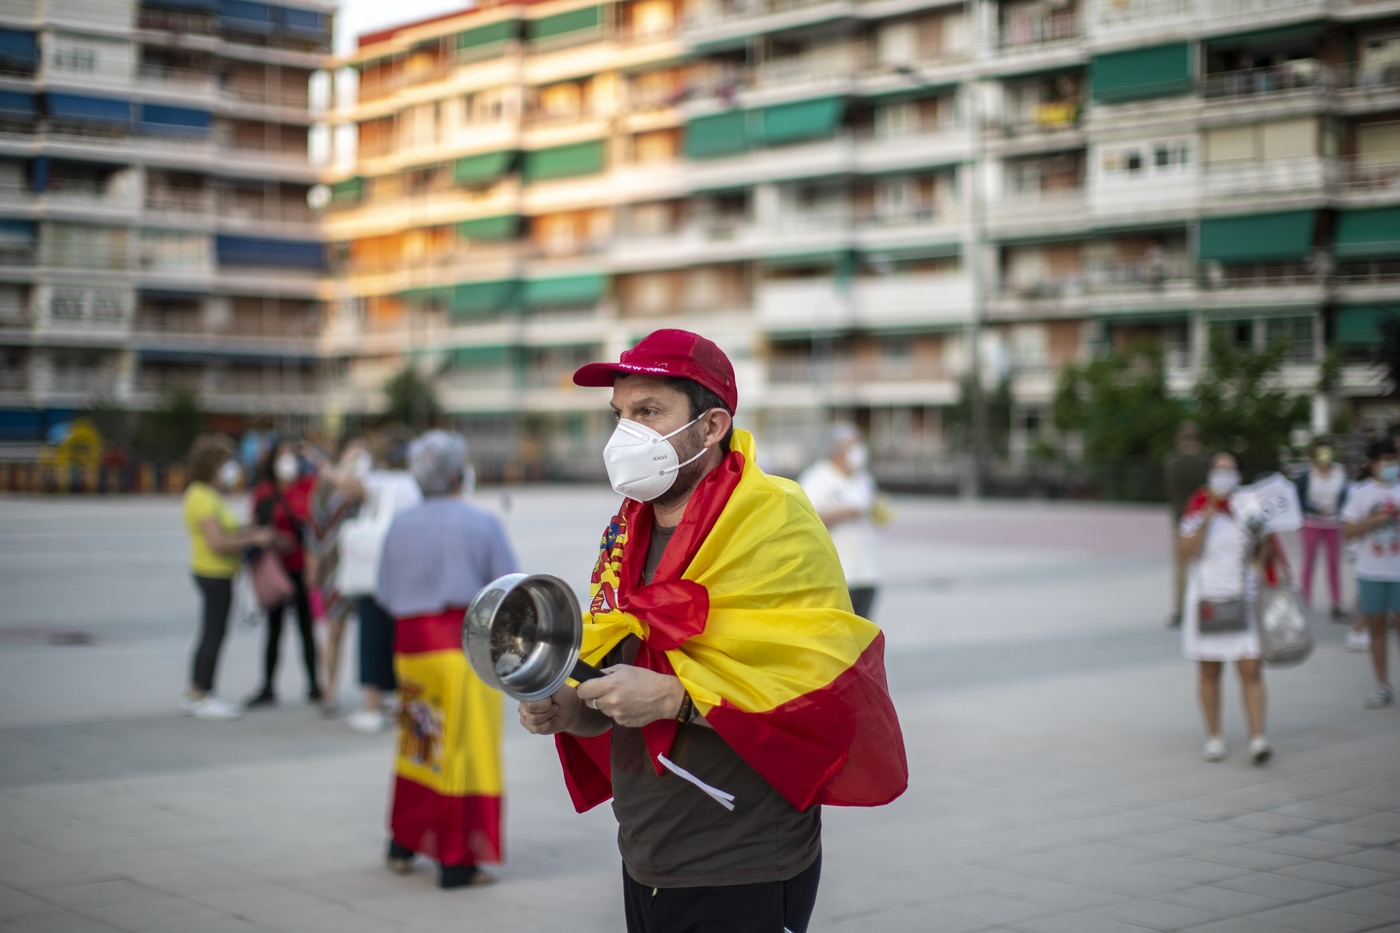 A man with a Spanish flag on his shoulders and banging a saucepan takes part in a protest against the Spanish government amid the lockdown to prevent the spread of coronavirus in Alcorcon, Spain, Friday, May 22, 2020. The Spanish government is allowing Madrid and Barcelona to ease their lockdown measures, which were introduced to fight the coronavirus pandemic. (AP Photo/Manu Fernandez)